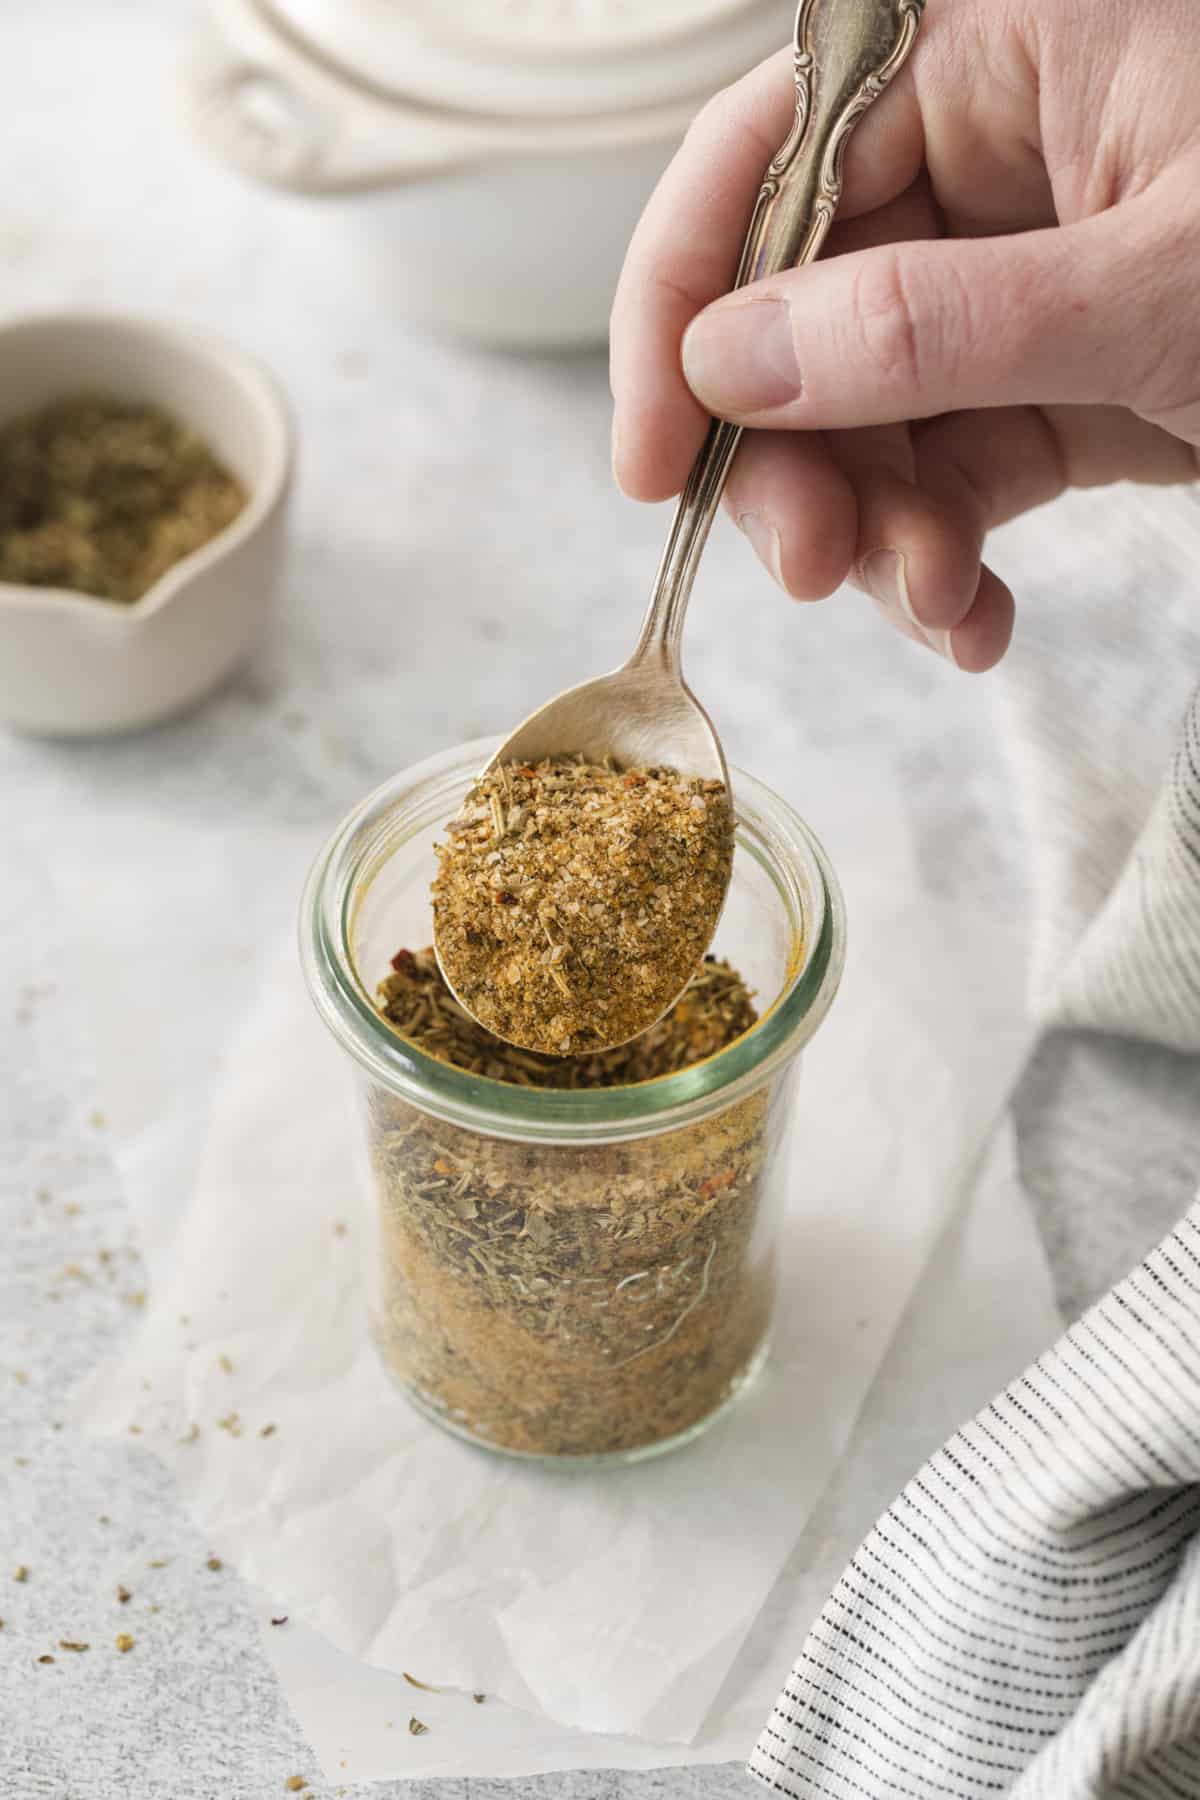 A spoonful of dry rub on the chicken scooped out of the jar.